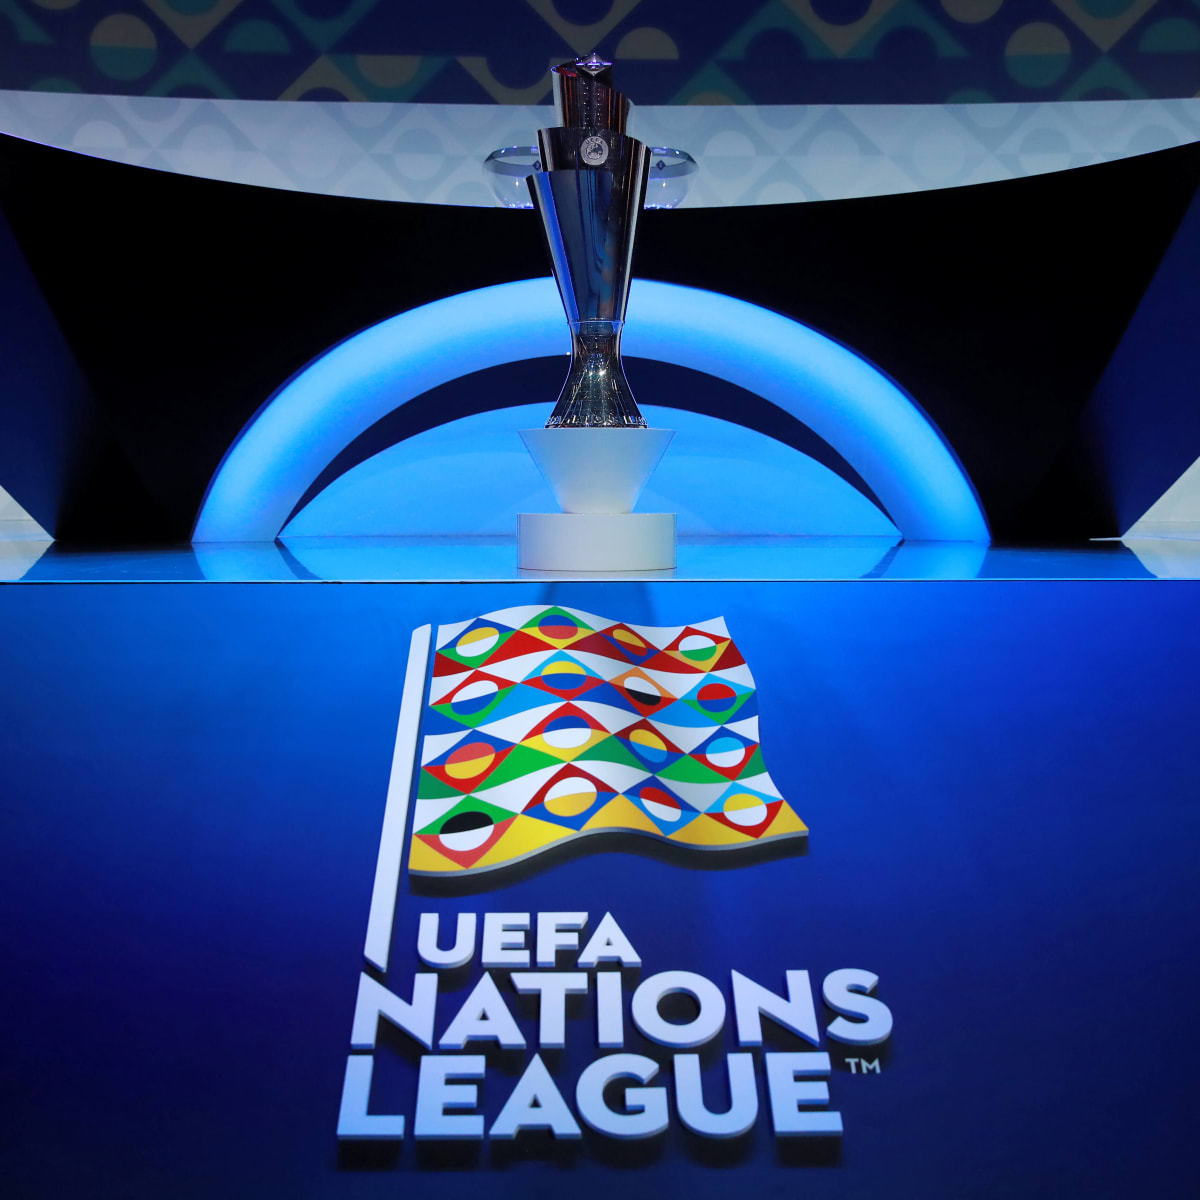 Champions League 2022/23 semi-finals: qualified teams, dates, fixtures and  game times